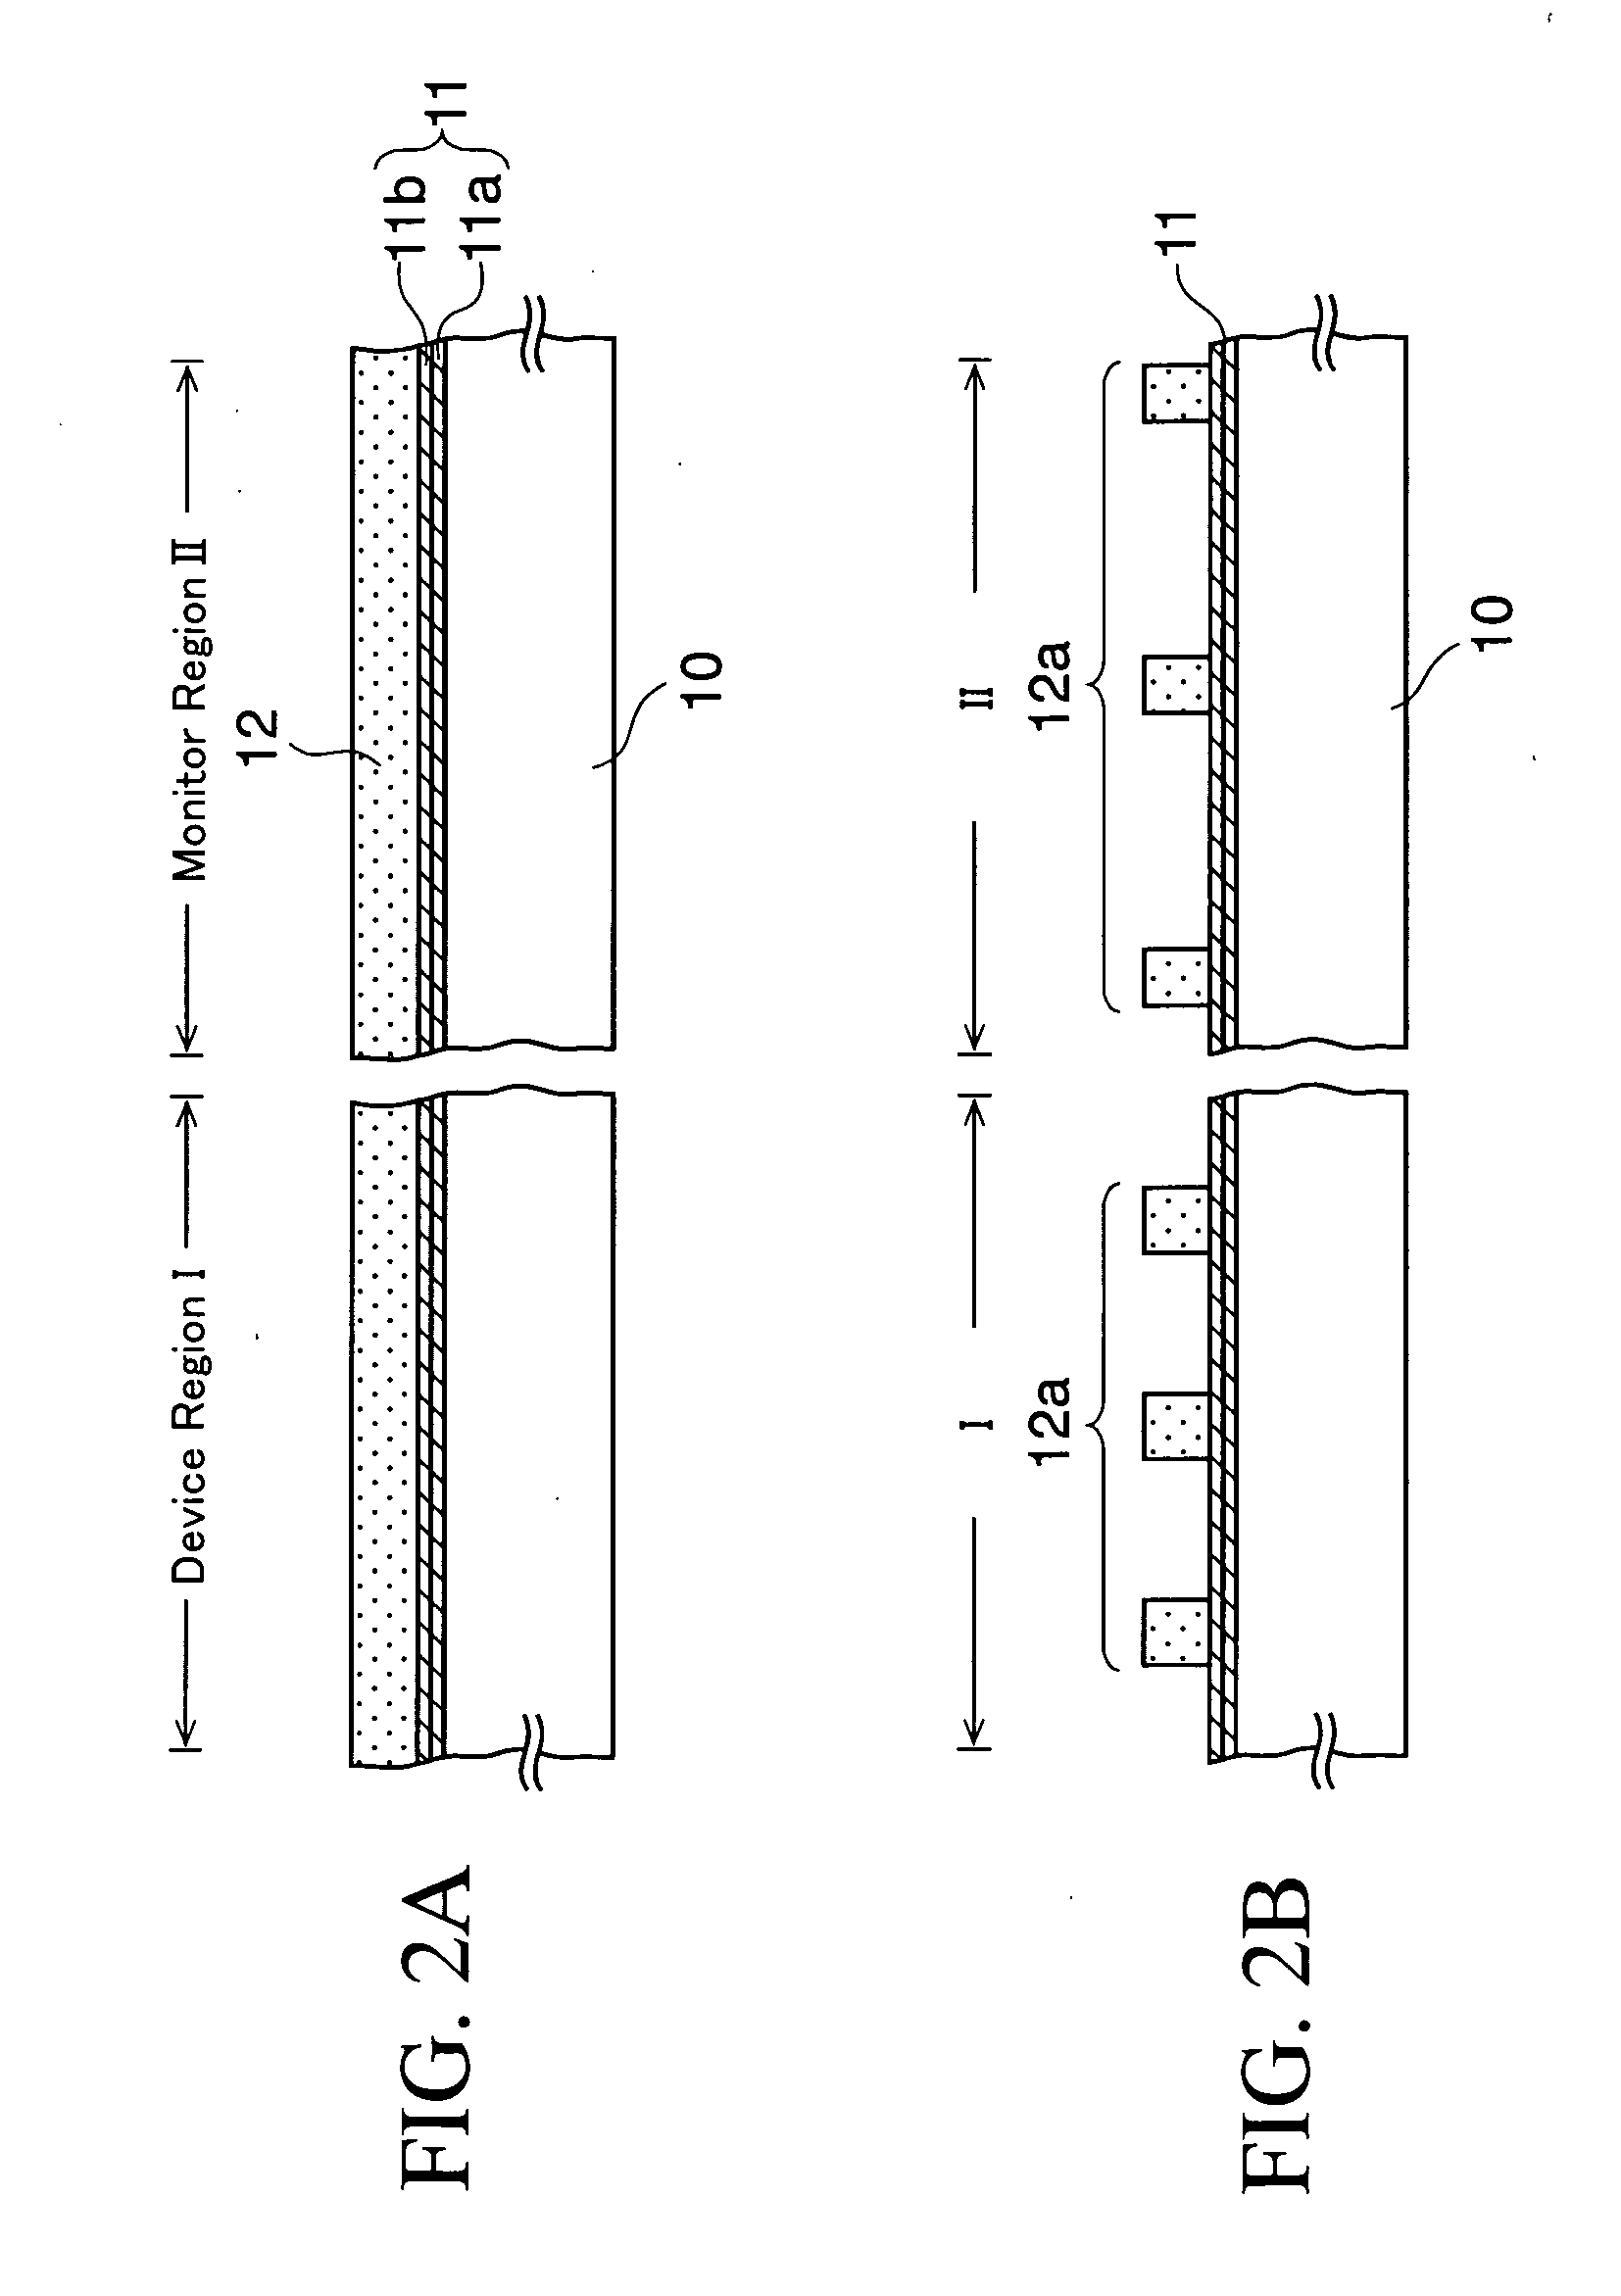 Mask for exposure and method of manufacturing the same